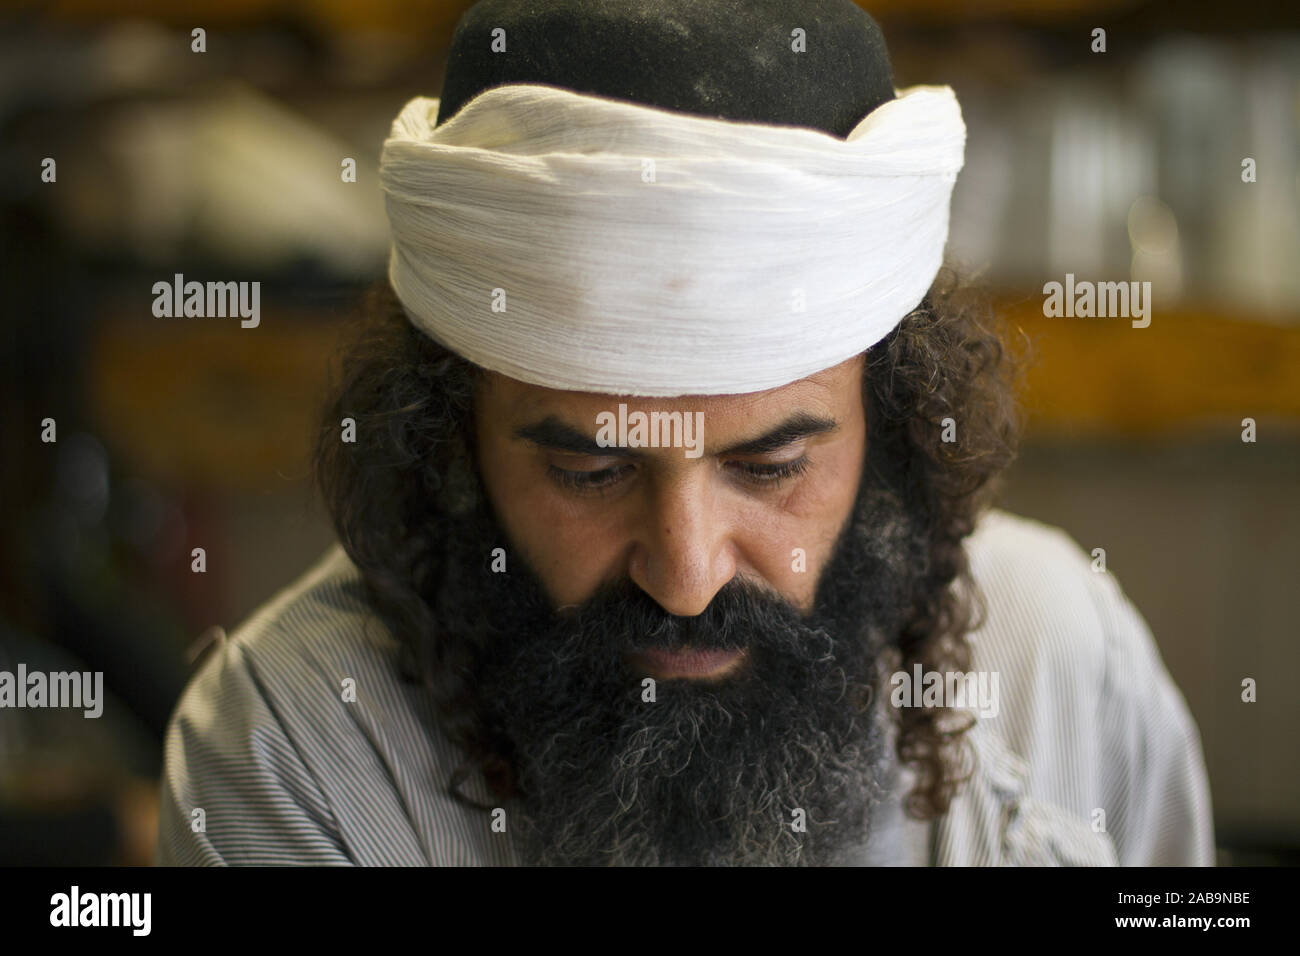 March 8, 2016 - Portrait of a Yemenite Jew While he was cooking Stock Photo